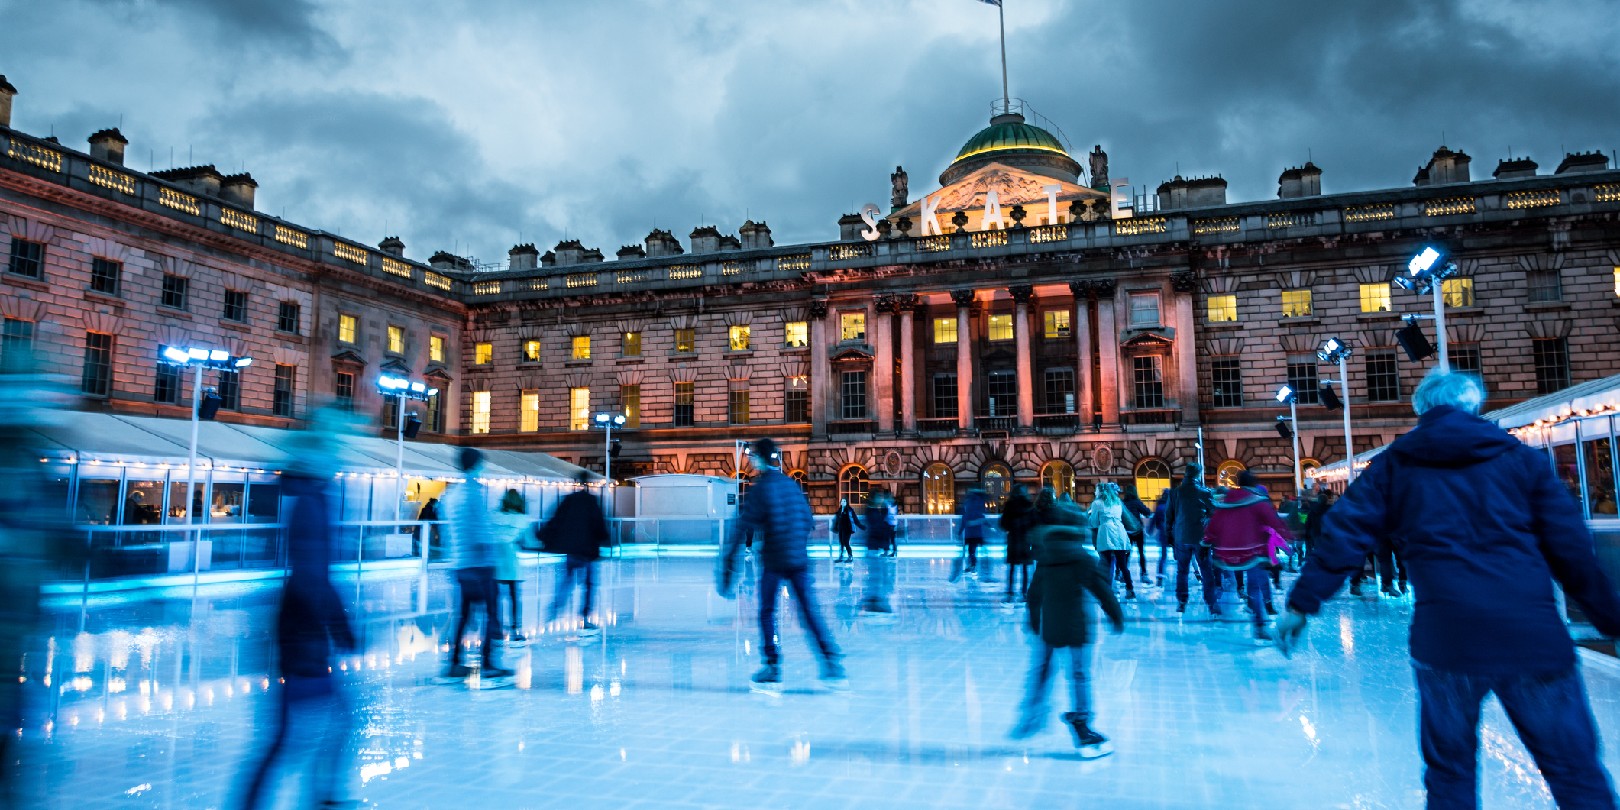 Blurred motion of crowds of people ice skating at Somerset House, a publically owned building in central London